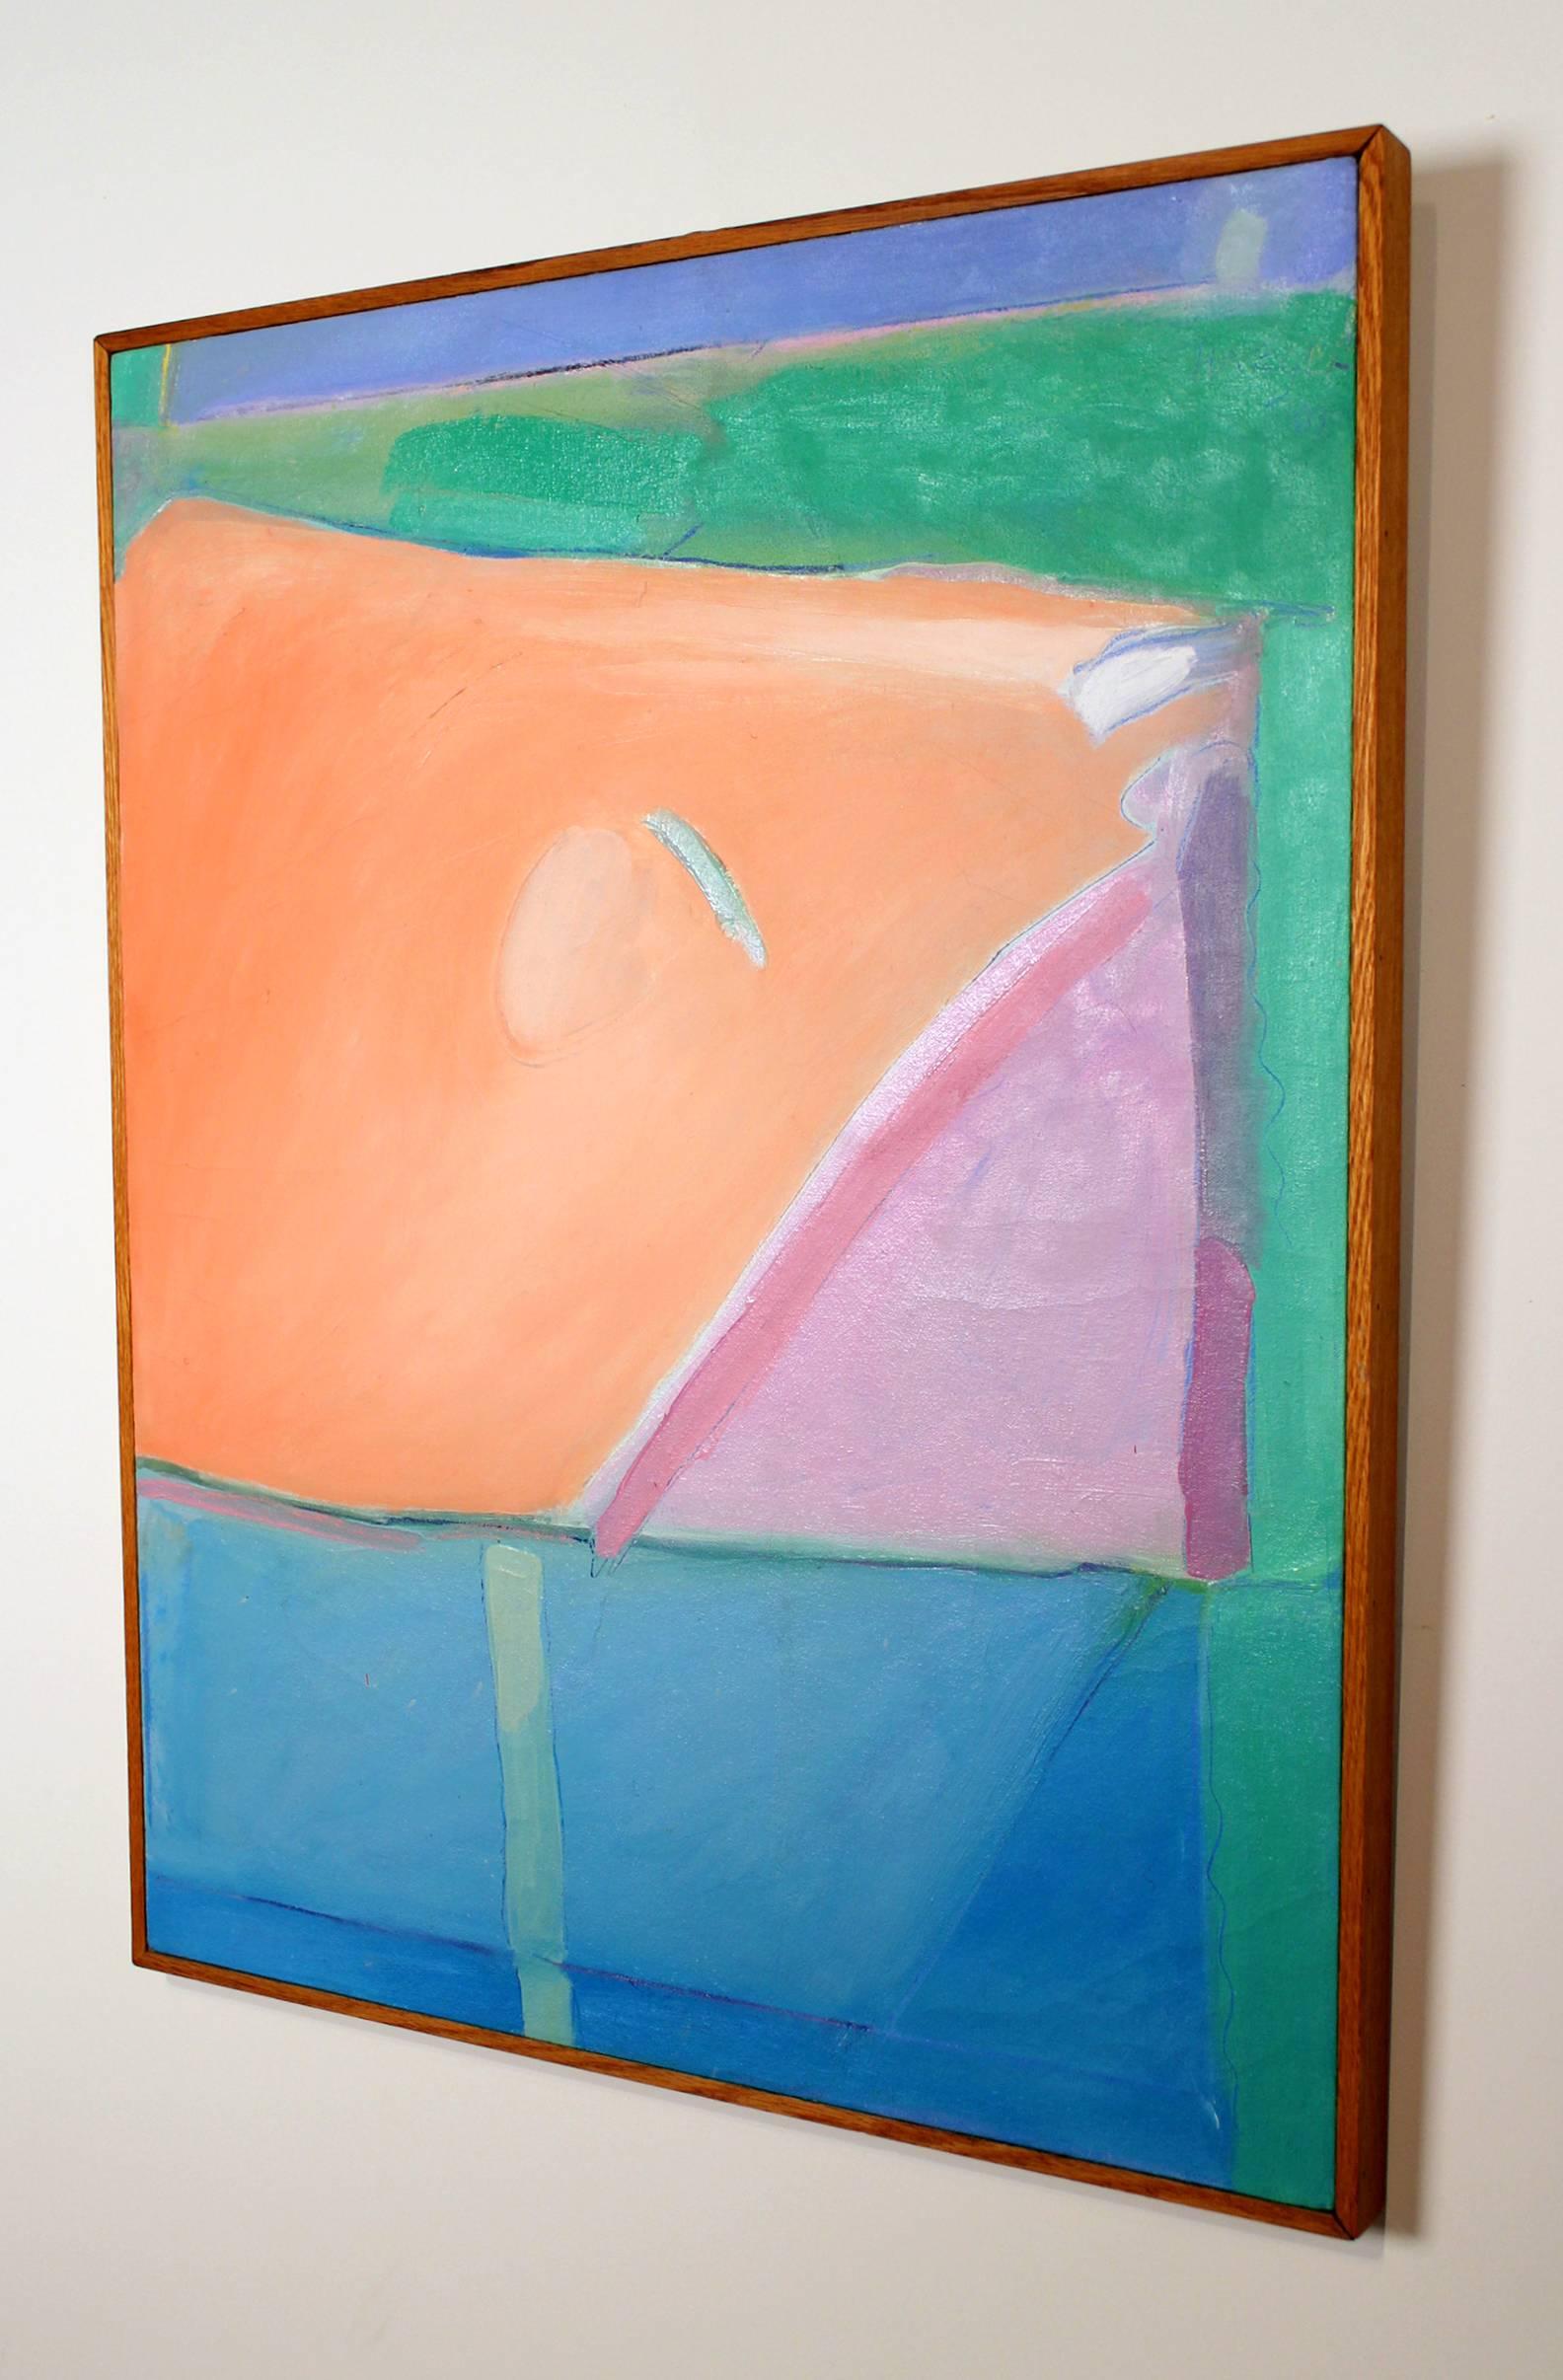 From a prominent estate in Colorado. A beautiful oil on canvas dated 1983 and signed Haeger. In the style of Richard Diebenkorn. Beautiful colors. Original frame.